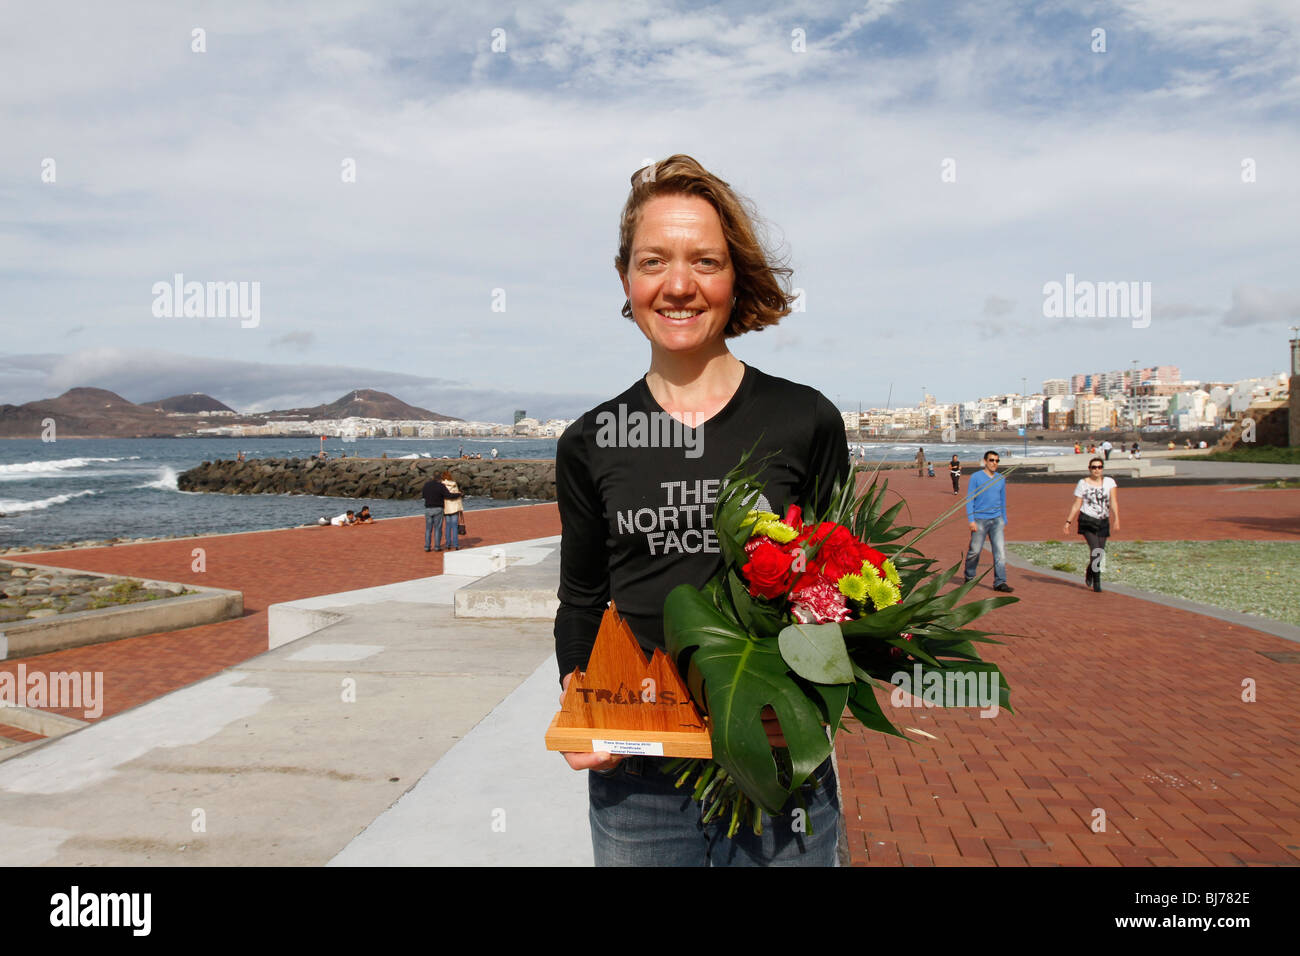 Elisabeth Lizzy Hawker receives her prize at the trans gran canaria  TransGranCanaria 2010 Stock Photo - Alamy